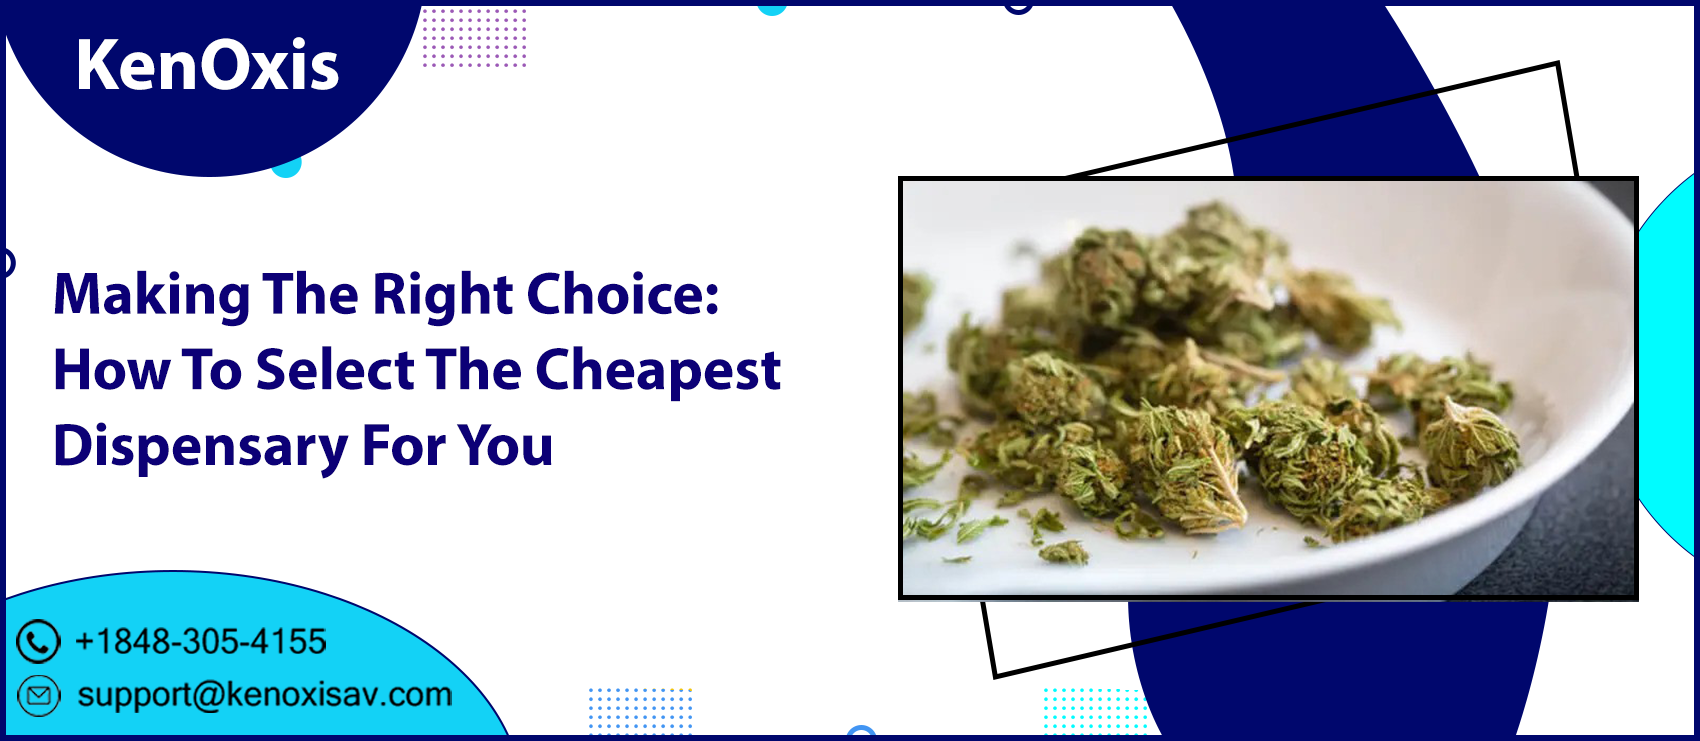 Making The Right Choice: How To Select The Cheapest Dispensary For You